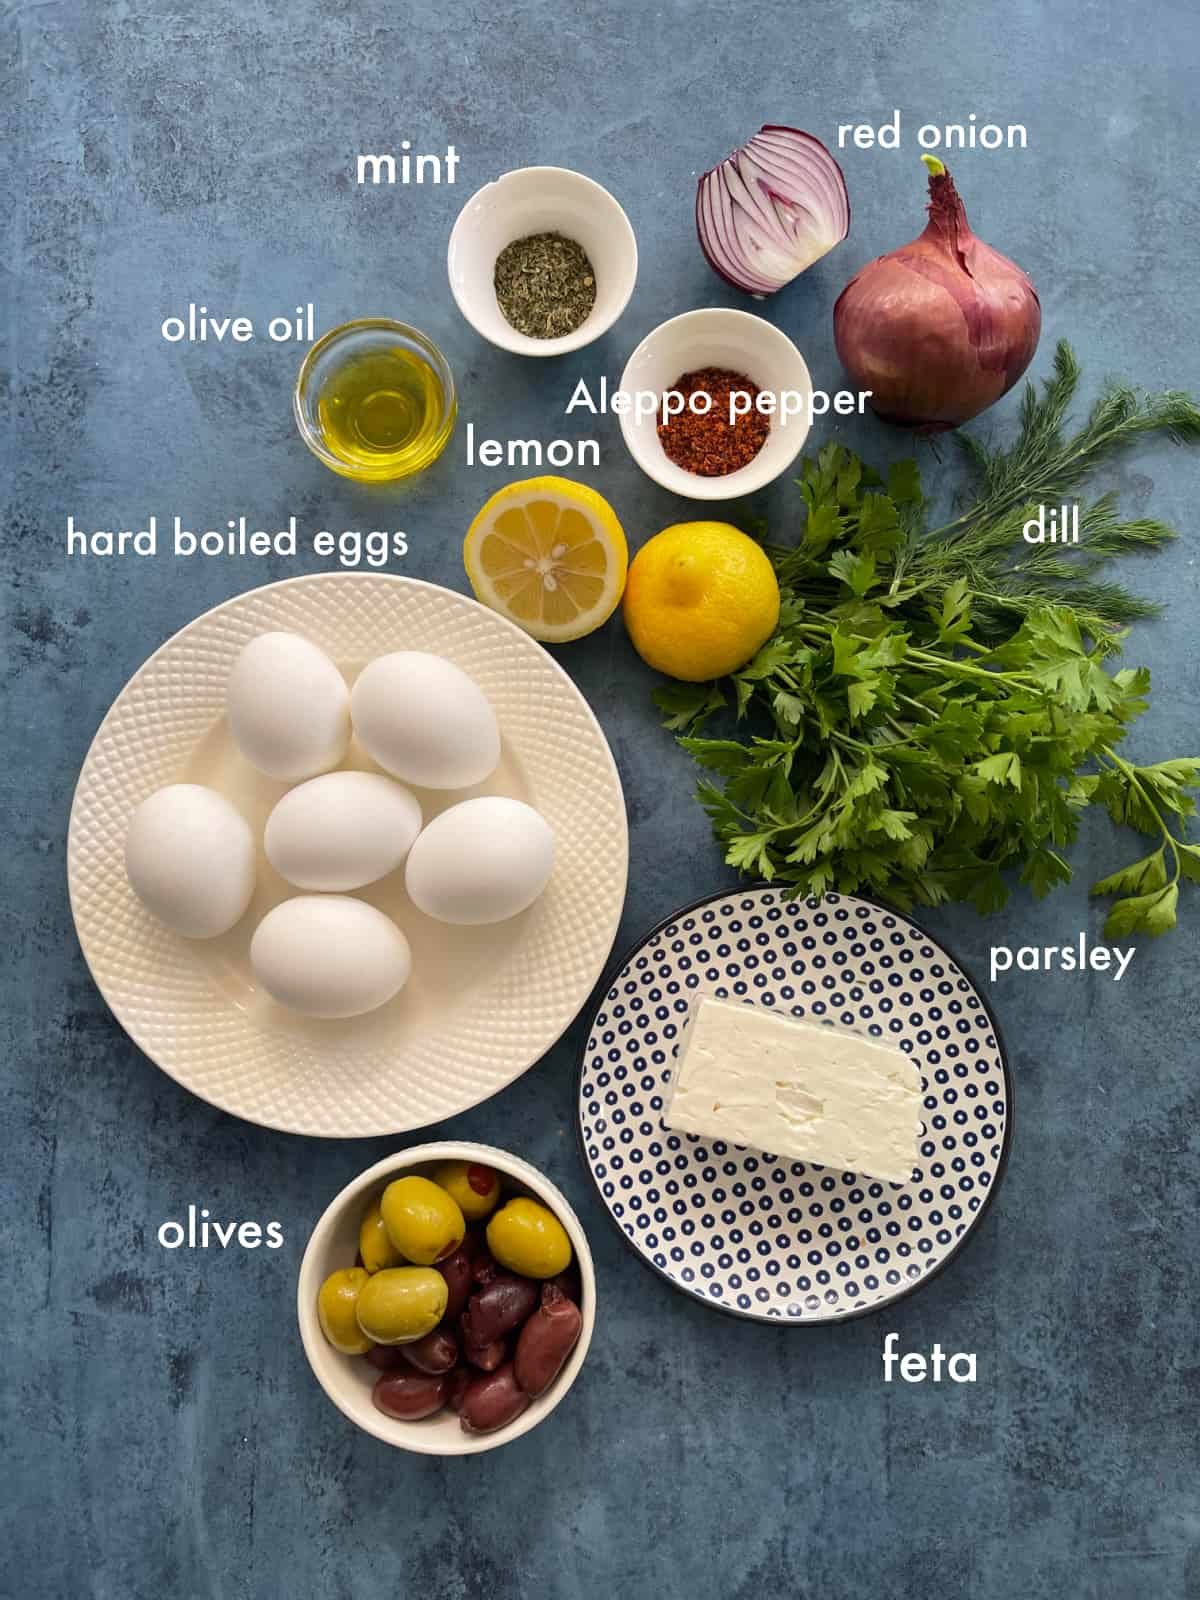 To make this recipe you need eggs, herbs, spices, feta, red onion and olives.